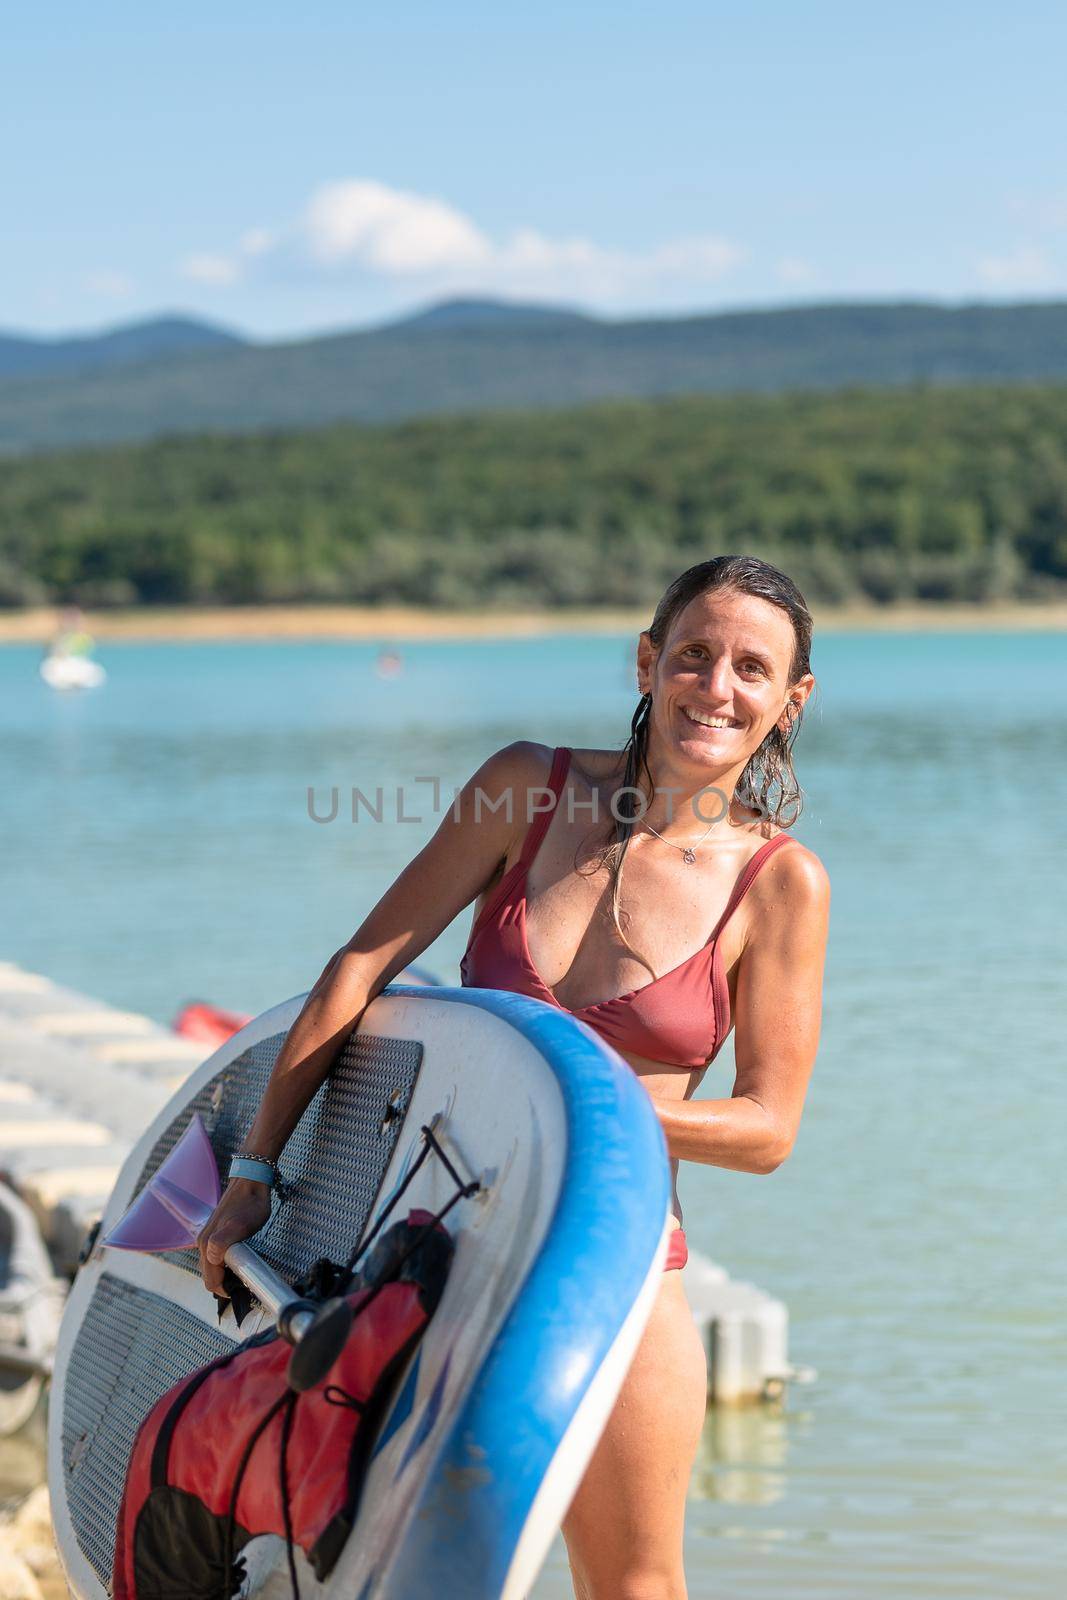 Woman Paddle Surfing on Lake Montbel in Ariege with the boats in the summer of 2022 by martinscphoto